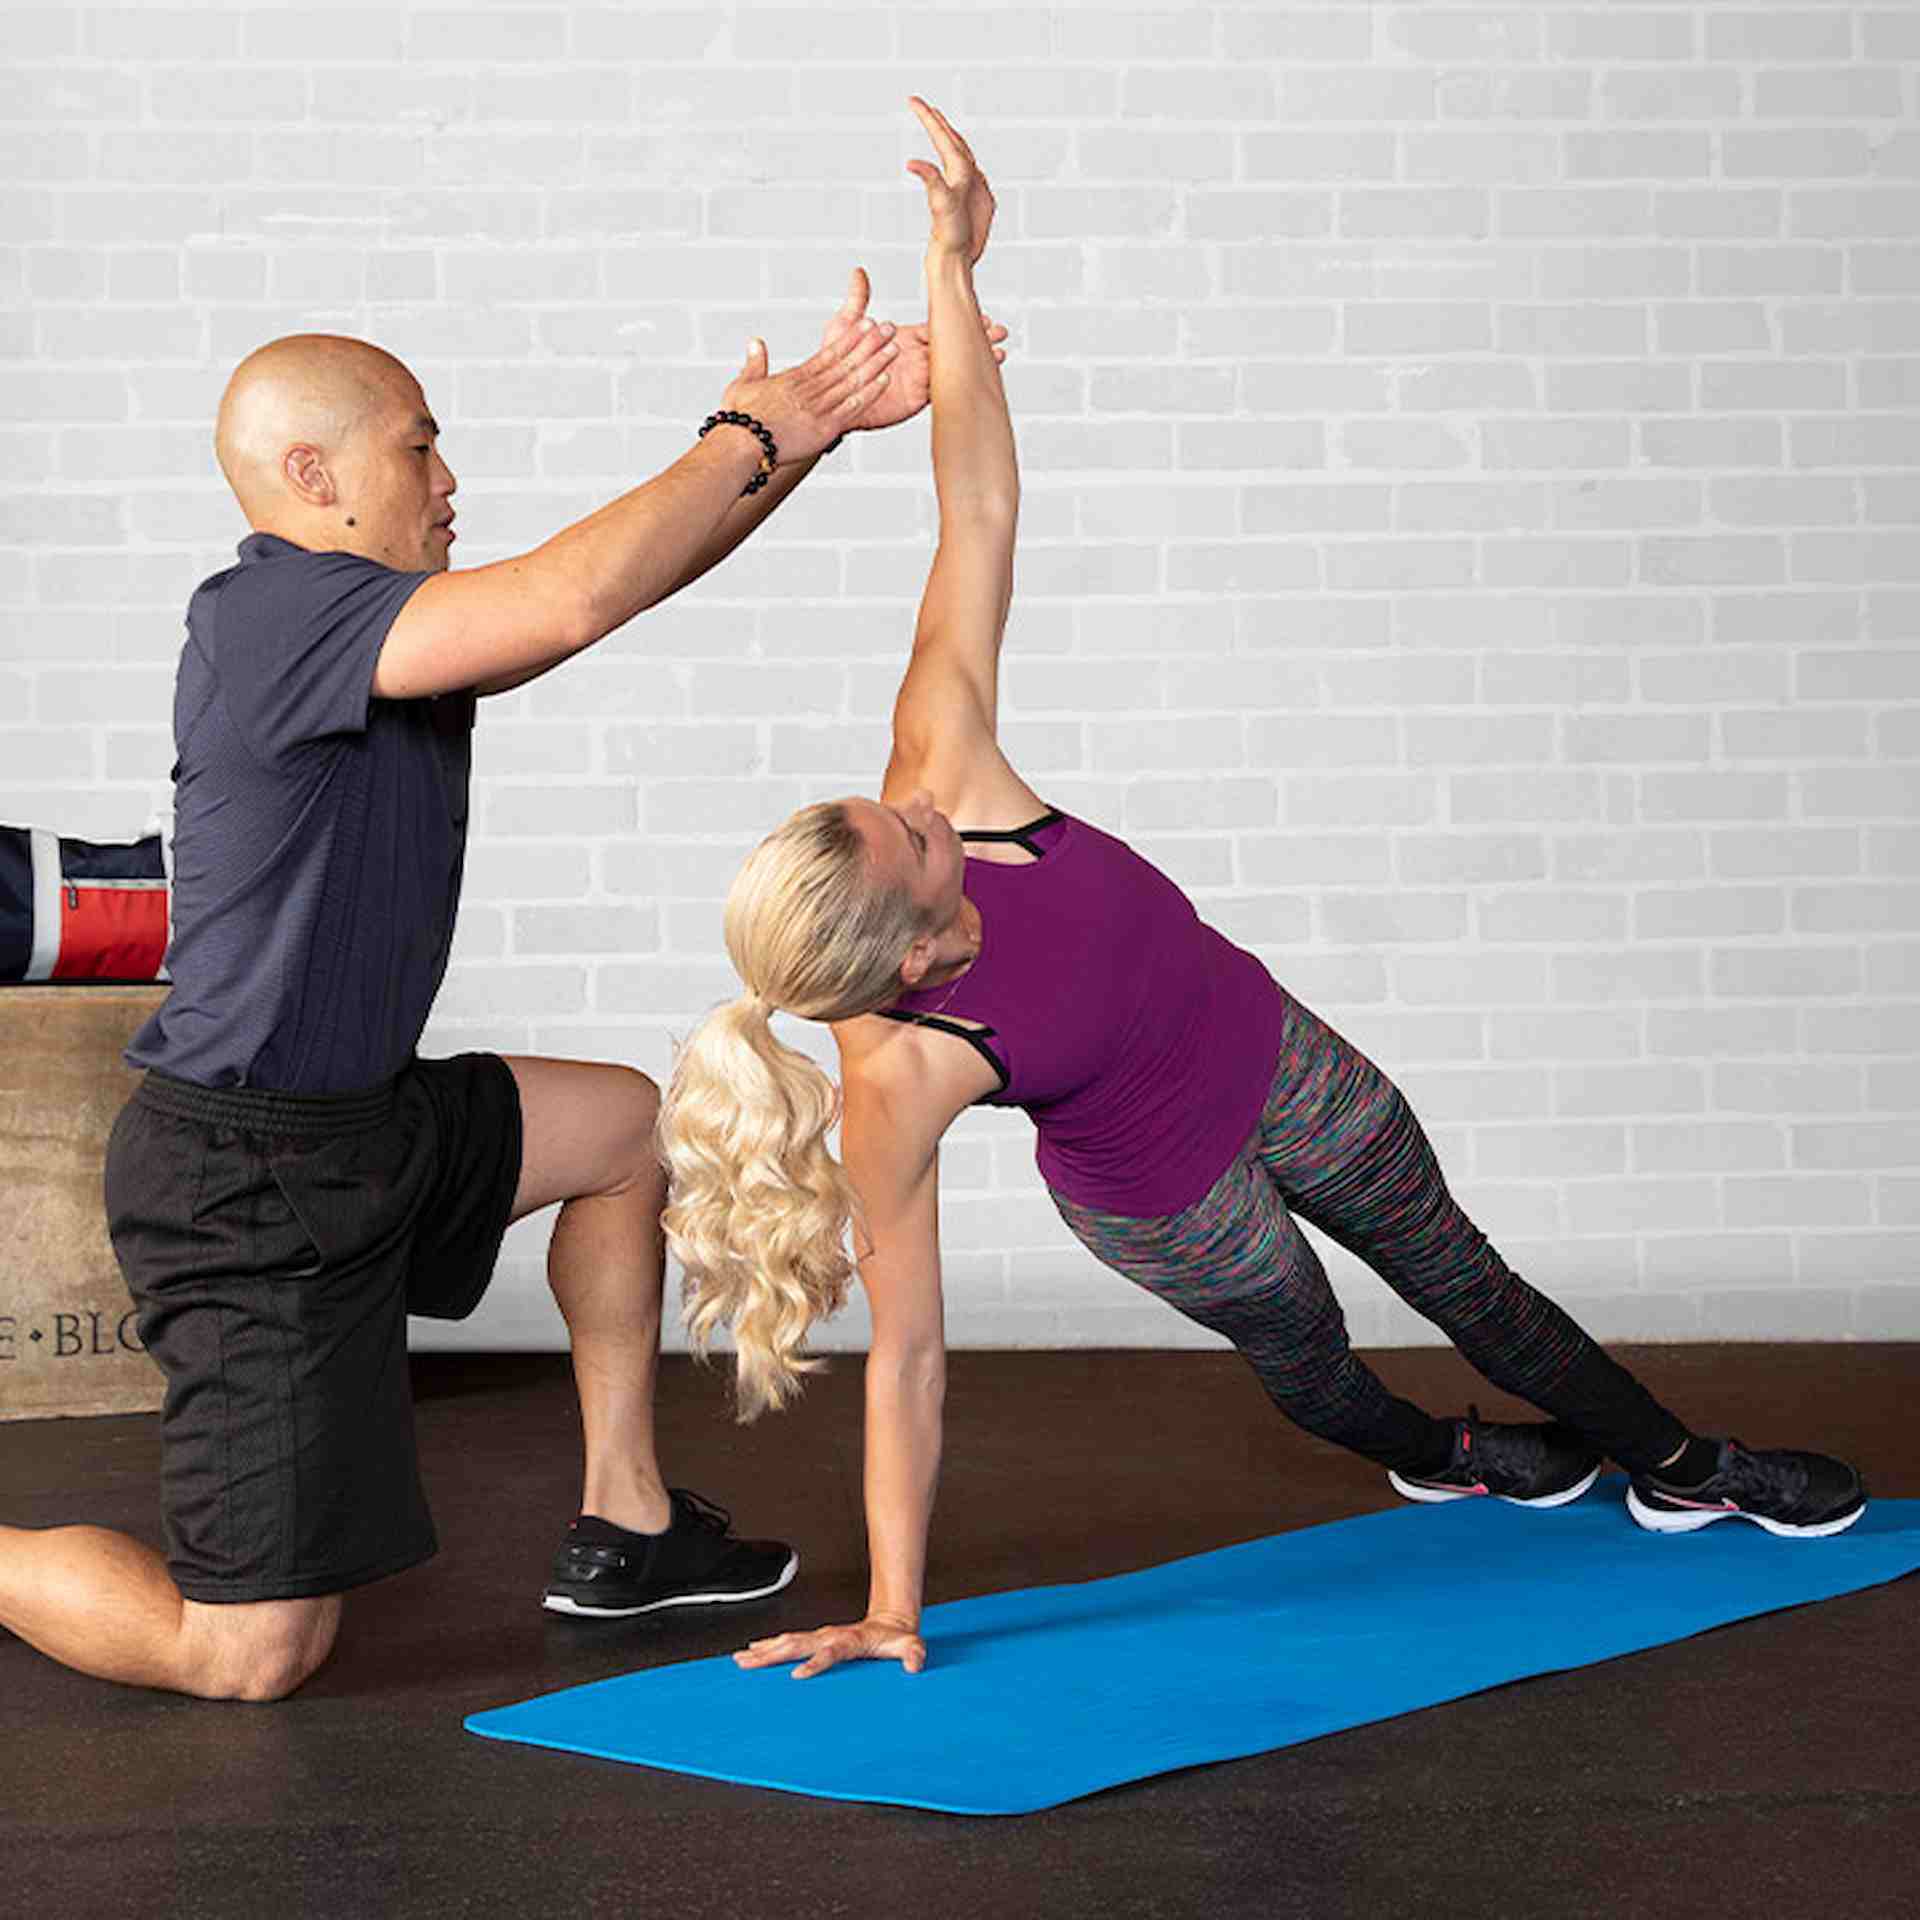 Male NASM trainer assisting female client in side plank with raised arm